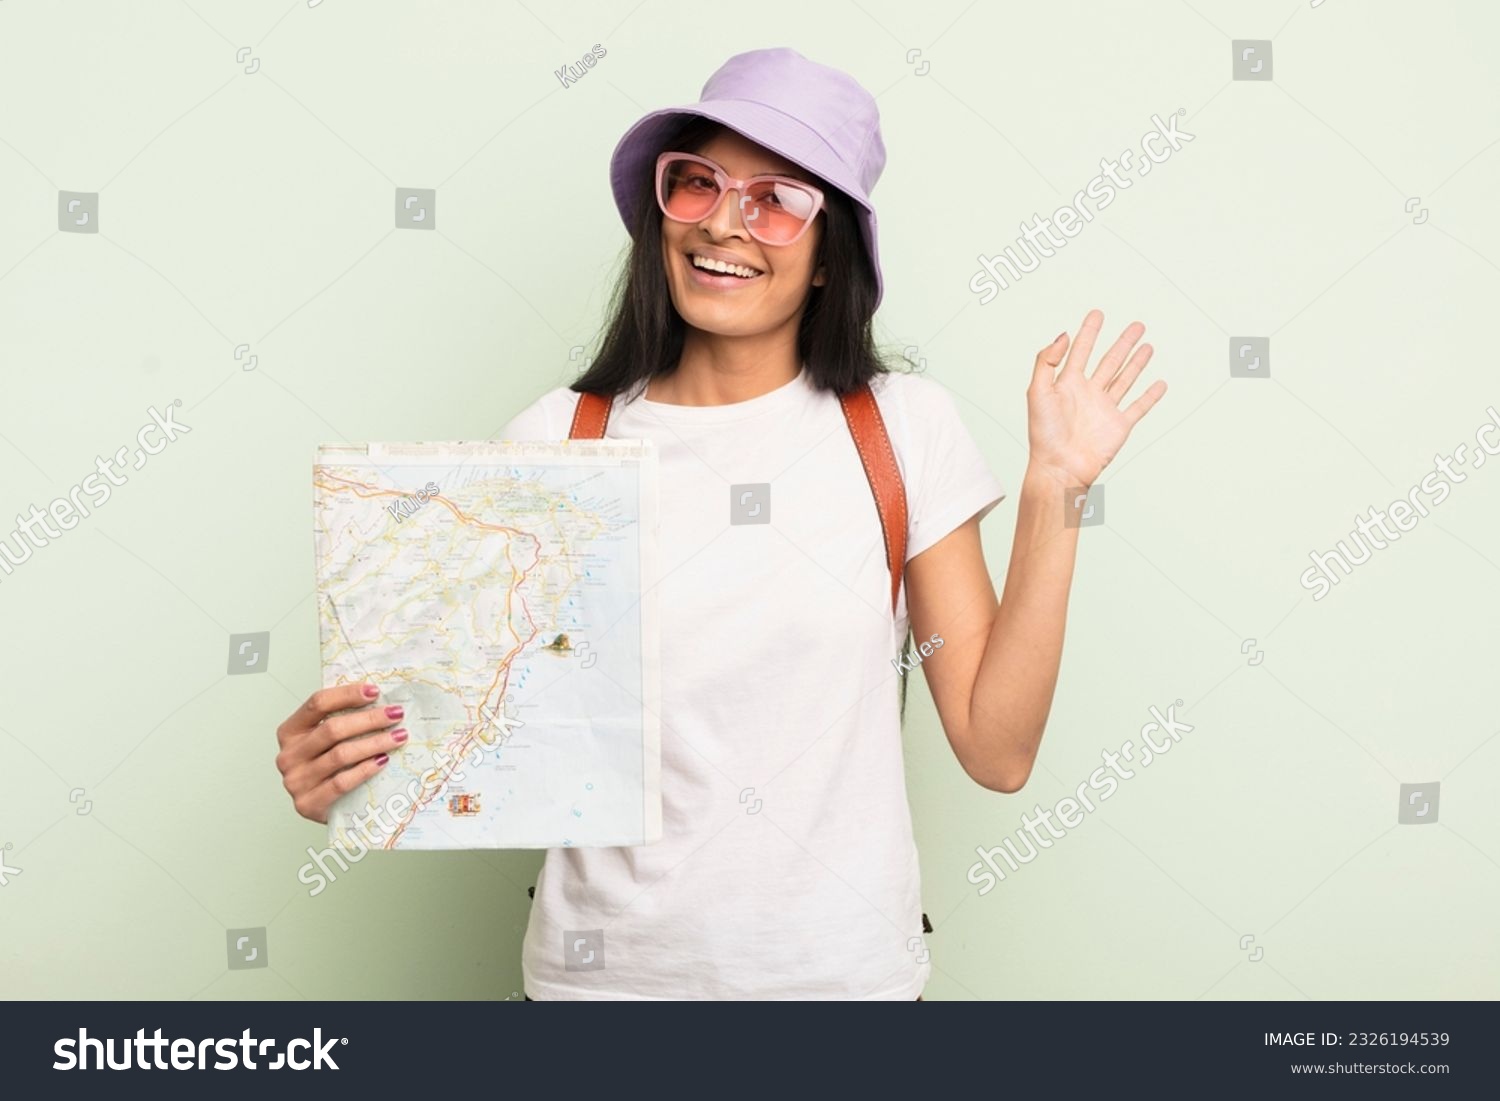 young pretty hispanic woman smiling happily, waving hand, welcoming and greeting you tourist and map concept #2326194539